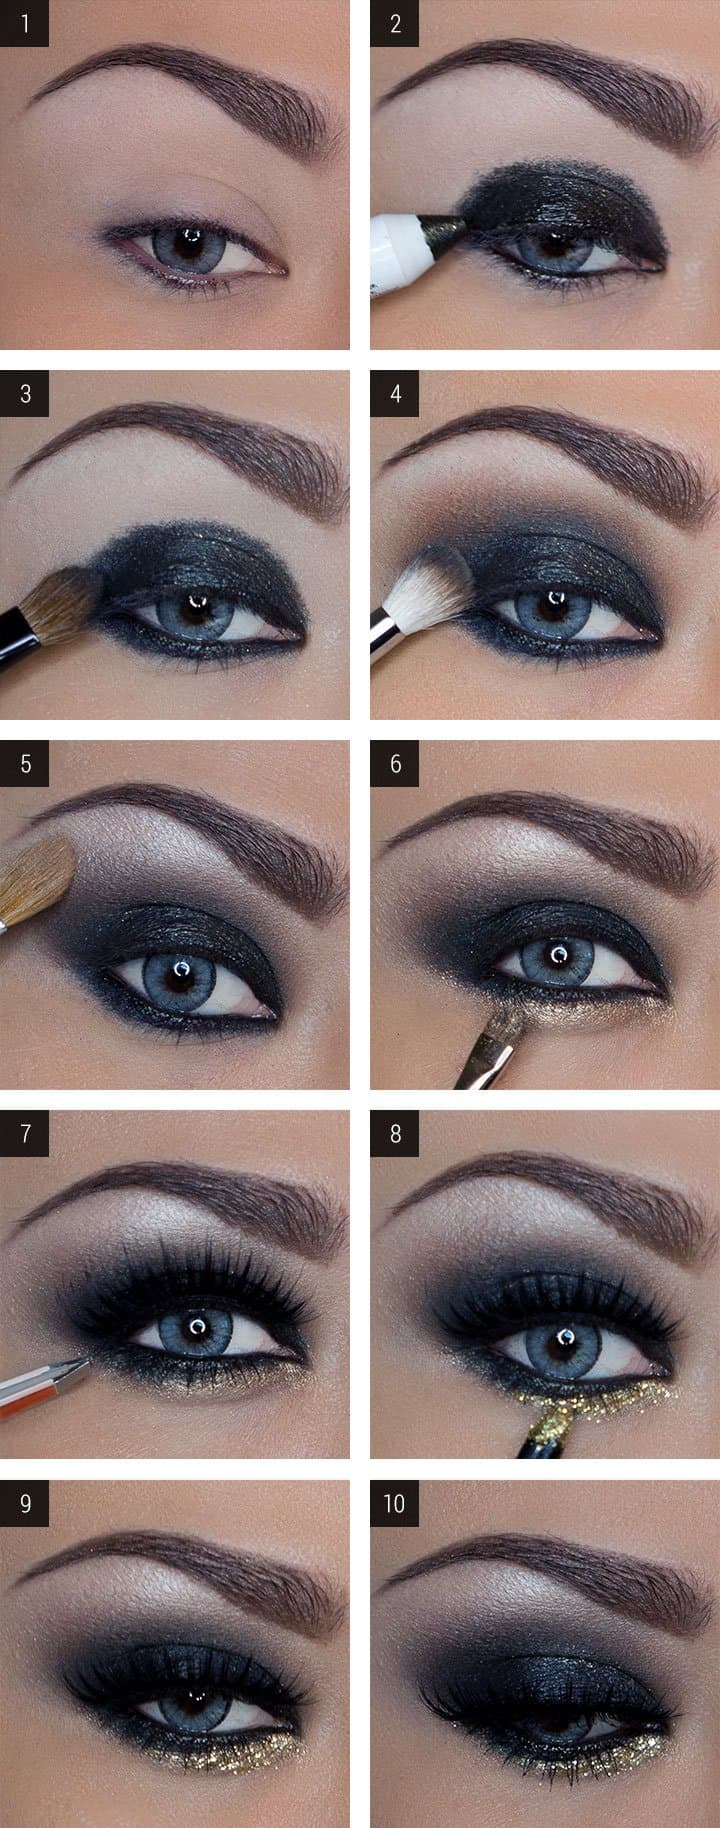 15 smokey eye tutorials - step by step guide to perfect